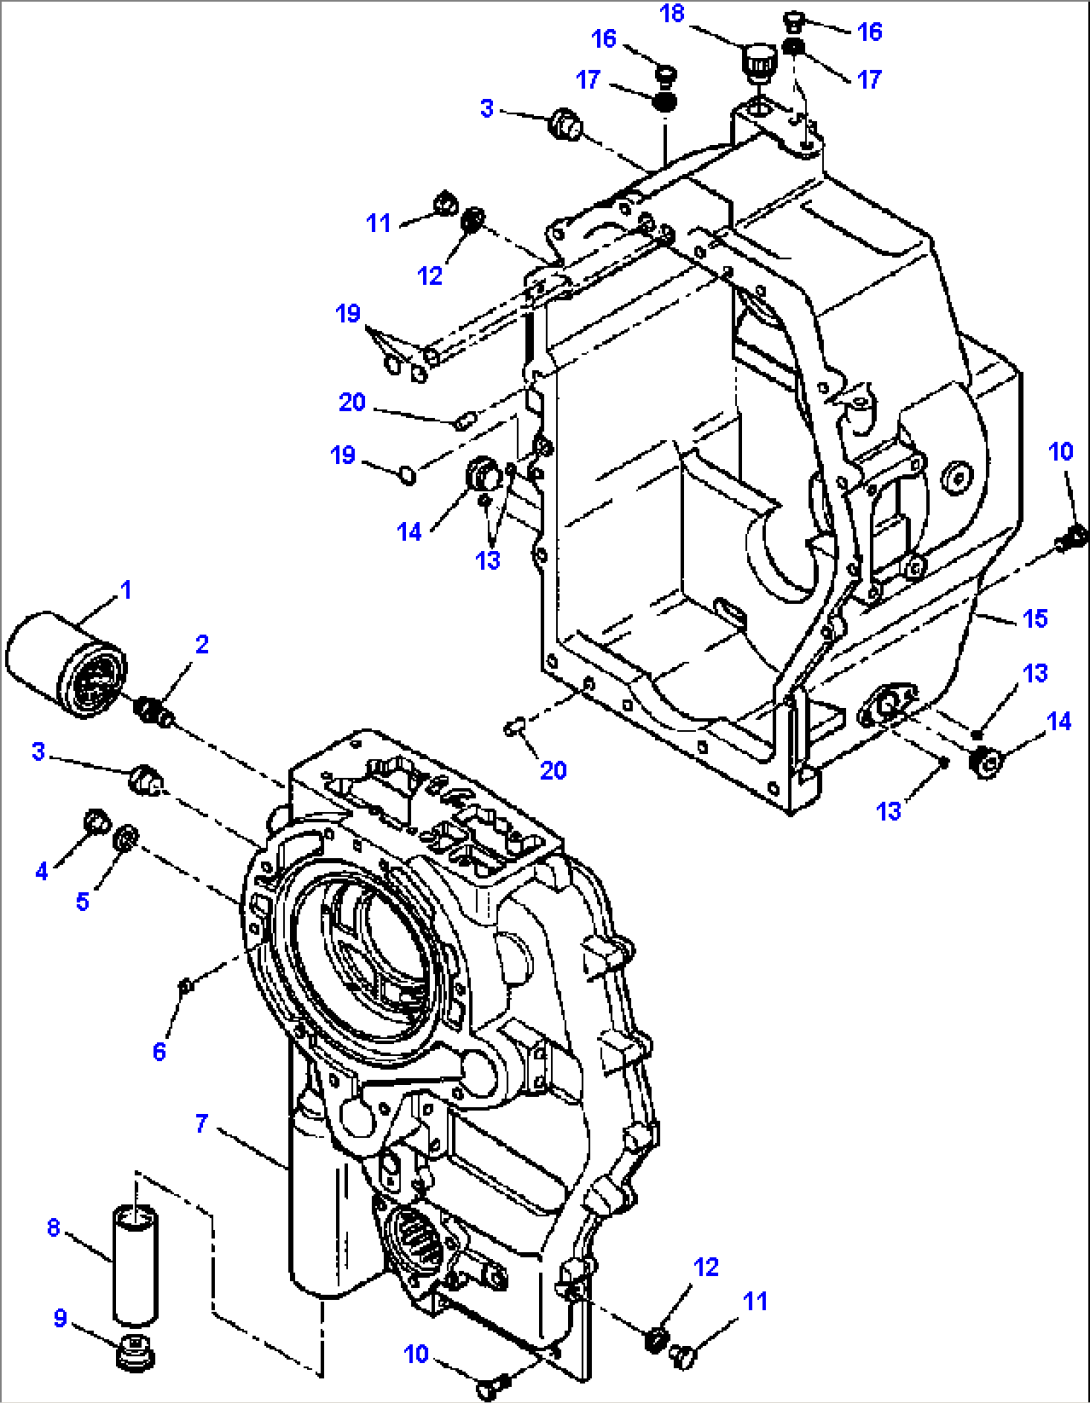 FIG. F3220-02A0 TRANSMISSION - FRONT AND REAR HOUSING